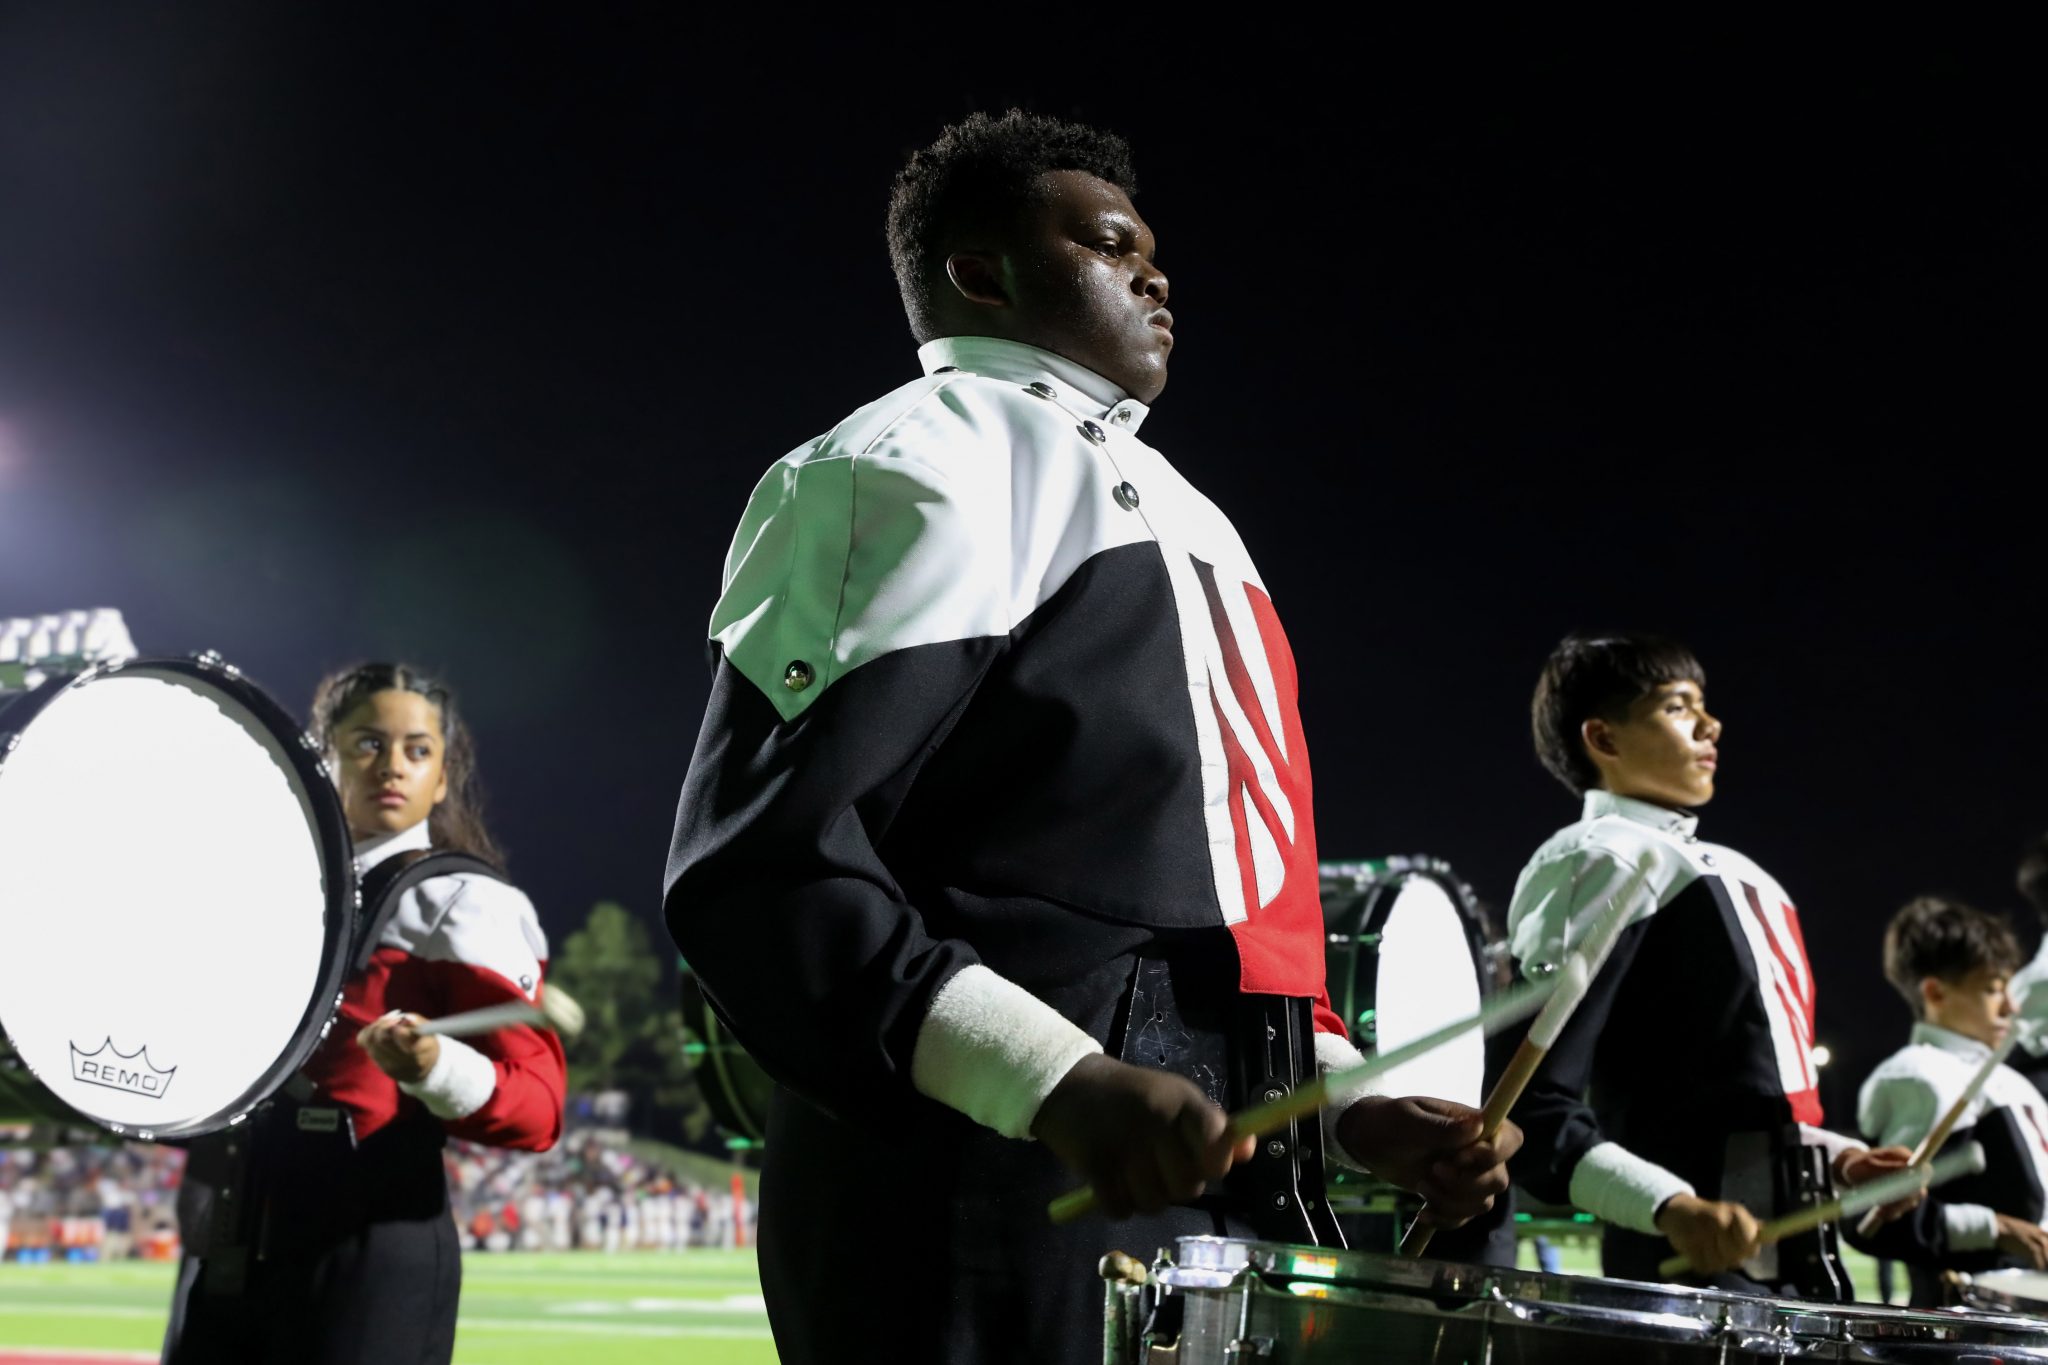 Drummers from the North Shore High School practicing  at Galina Park ISD Stadium Friday, October 27th, 2023 in Houston, TX. The band was rehearsing before getting on the field following Atascasita High School's Marching Band.